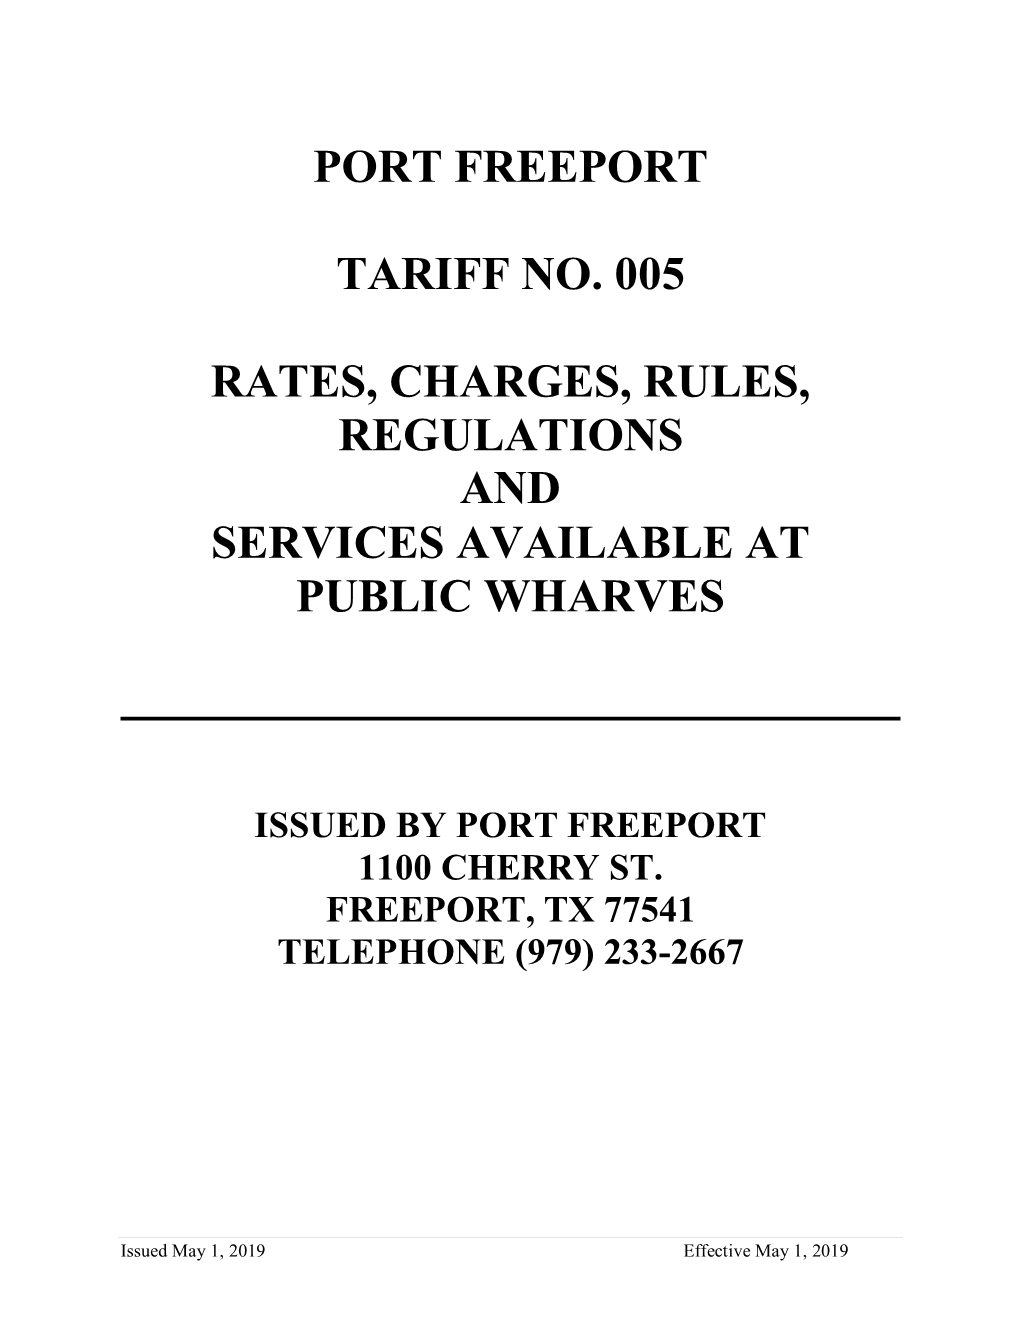 Port Freeport Tariff No. 005 Rates, Charges, Rules, Regulations And